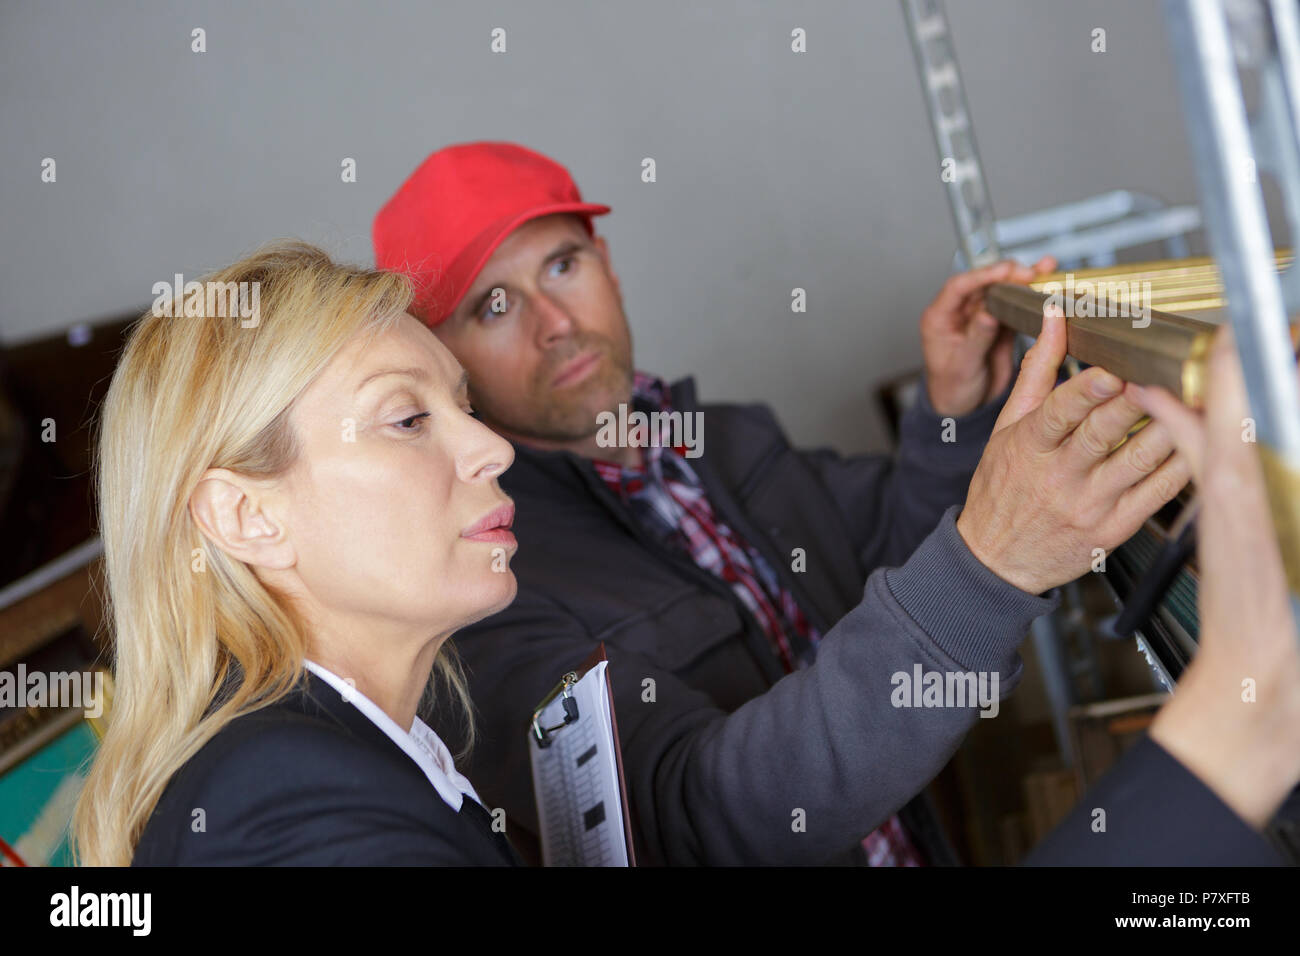 forewoman and worker inspecting shelves in workshop Stock Photo